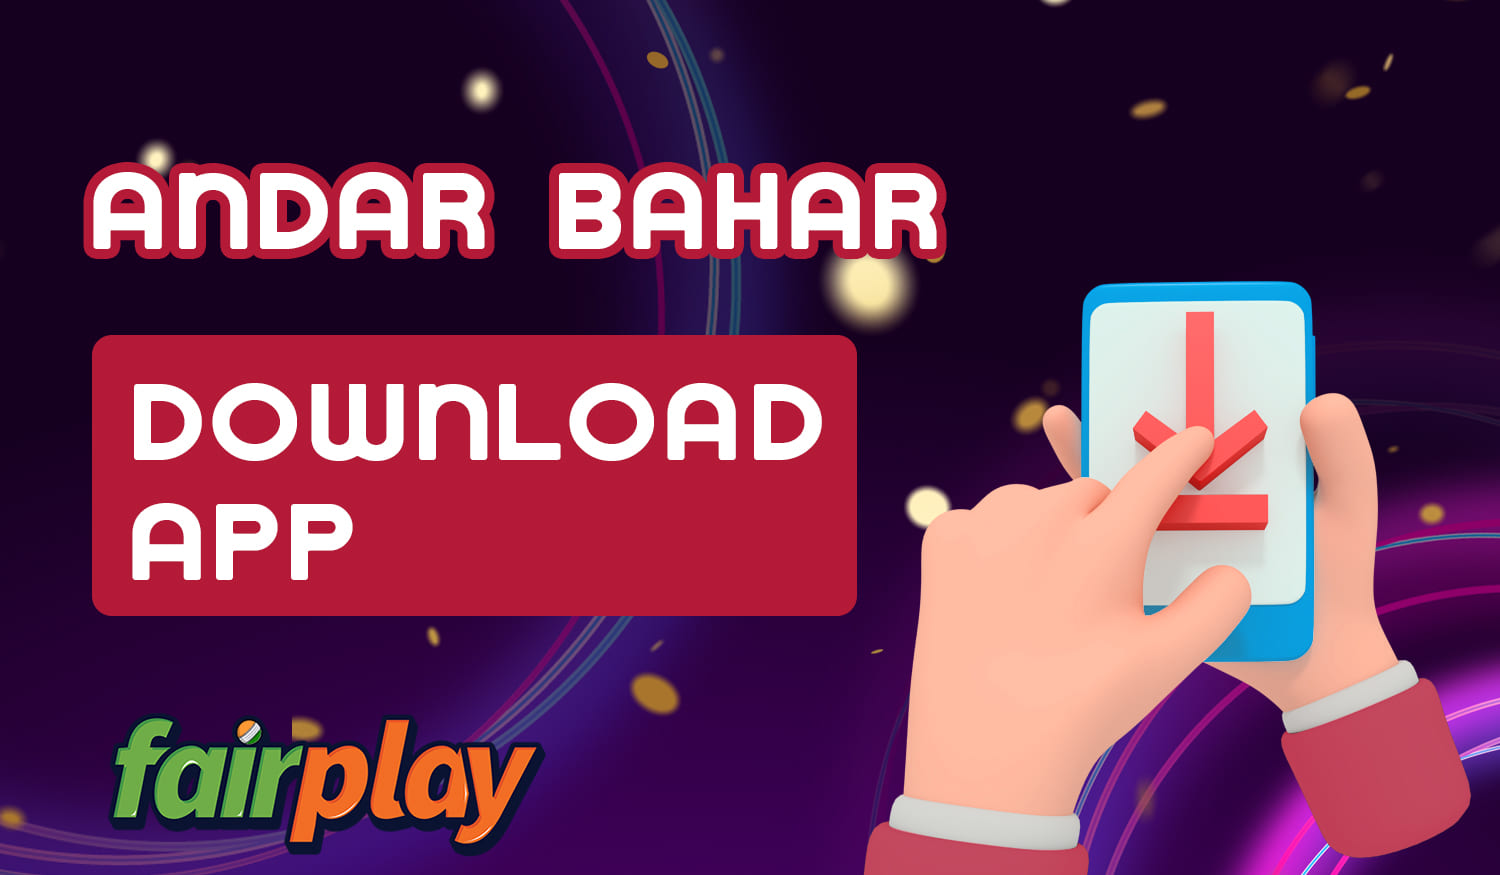 Step by step instructions for downloading and installing the Fairplay mobile app